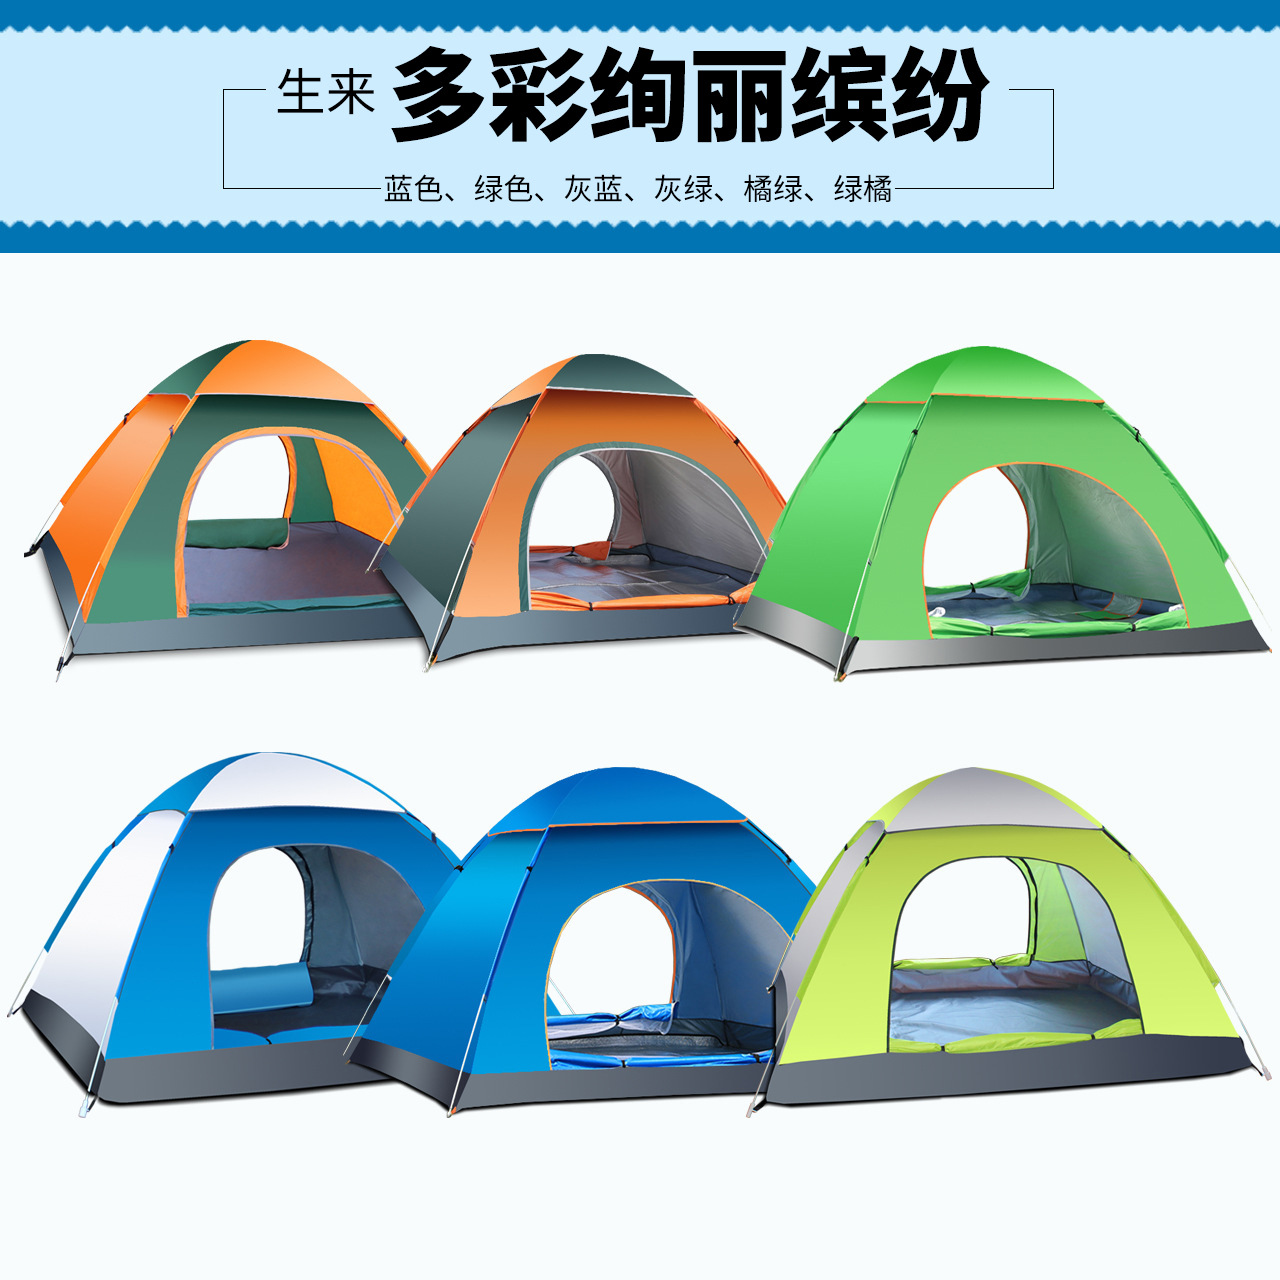 Mianbaoshu Beach Tent Outdoor Automatic Quickly Open Outdoor Camping Tent 3-4 People Folding Camping Supplies